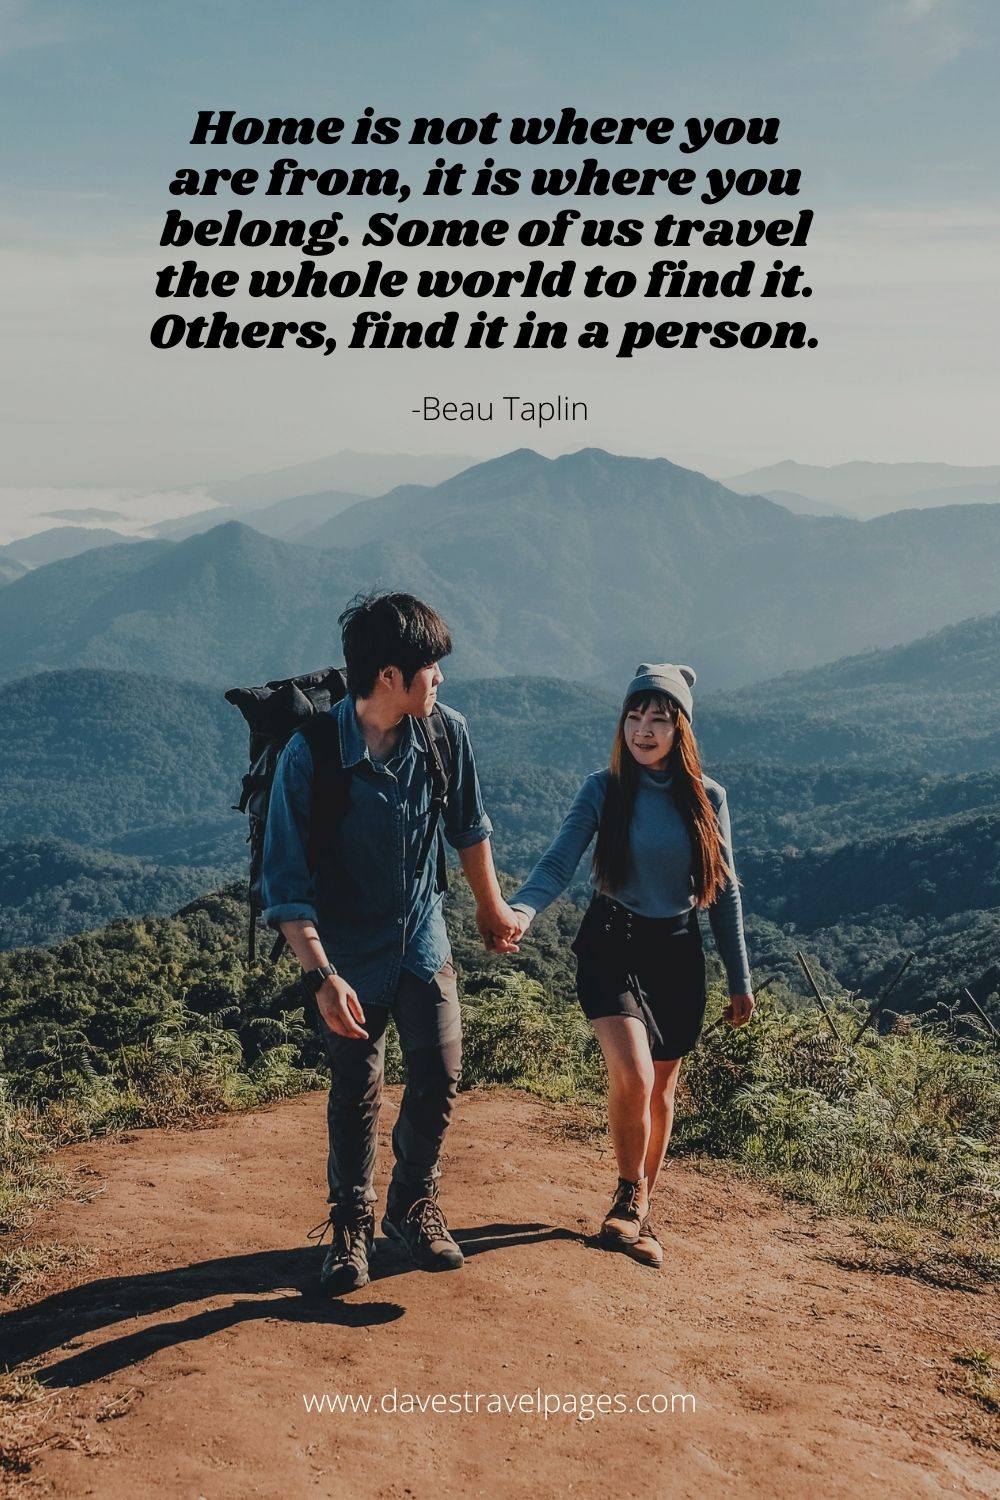 Travel Quote: Home is not where you are from, it is where you belong. Some of us travel the whole world to find it. Others, find it in a person.